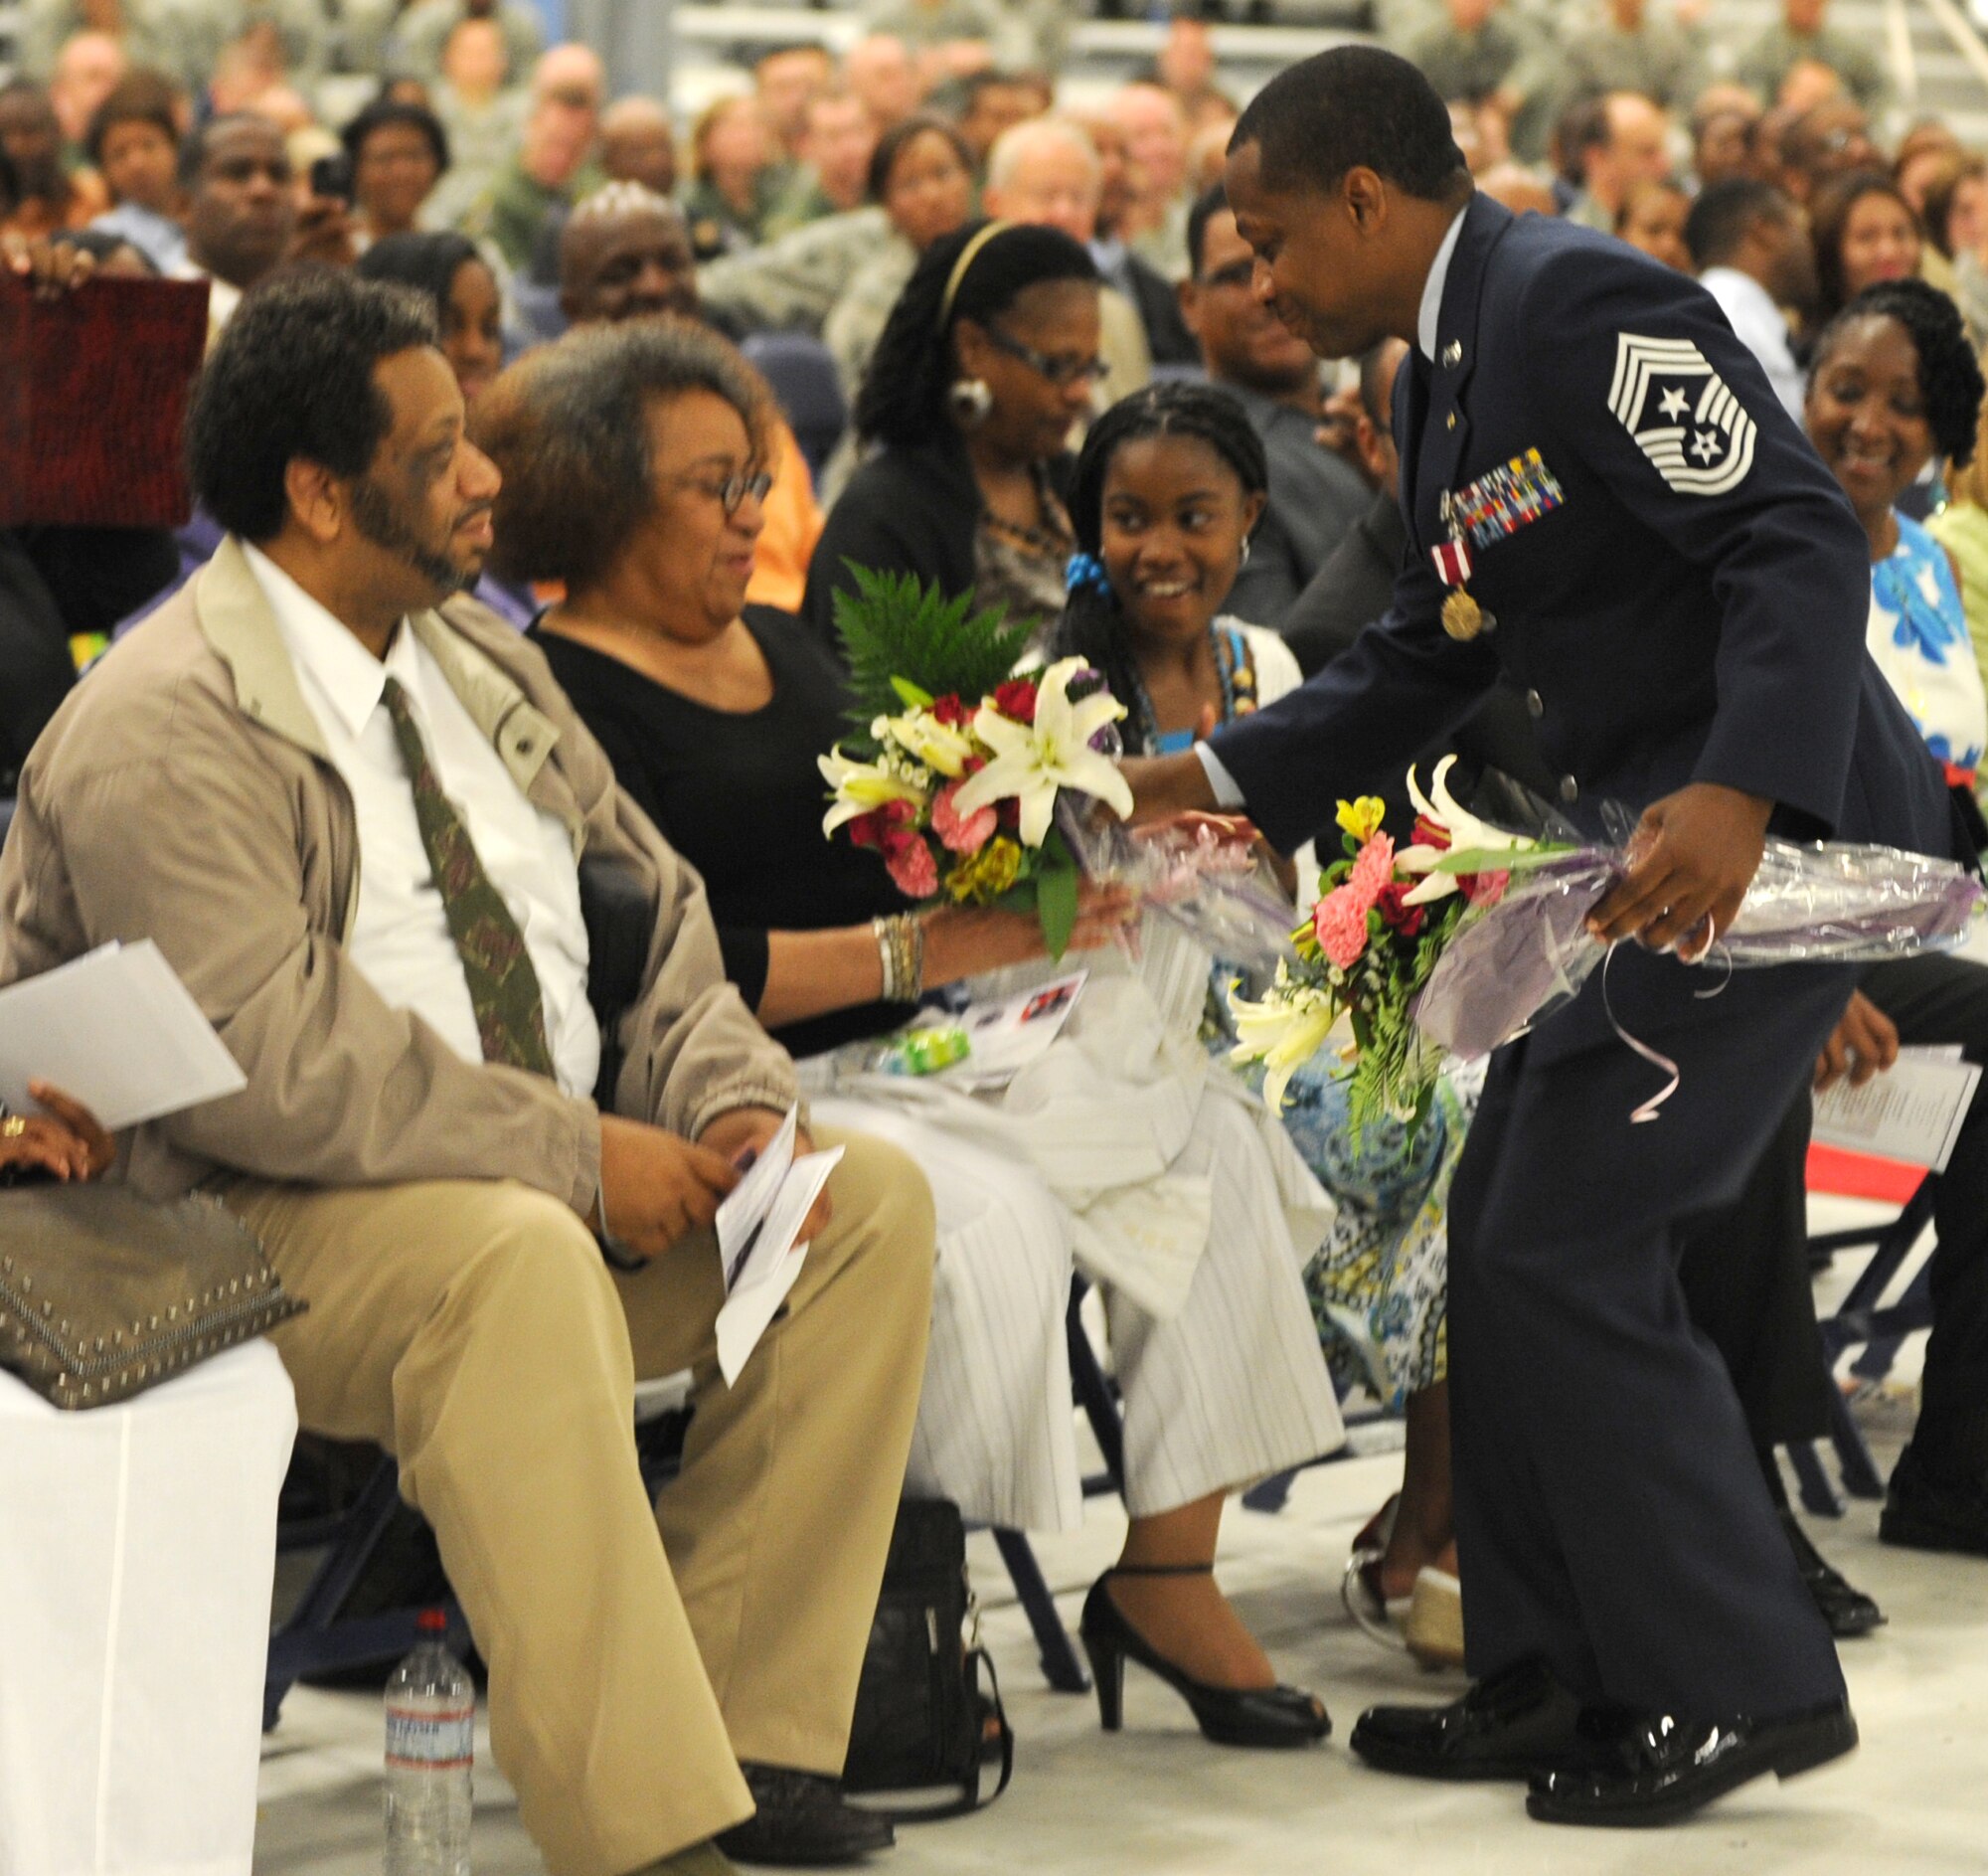 Chief Master Sgt. Anthony Brinkley, 11th Wing/Joint Base Andrews command chief, presents his mother with a bouquet of flowers during his retirement ceremony June 8, 2012. Brinkley served more than 28 years in the Air Force.  (U.S. Air Force Photo by Staff Sgt. Torey Griffith)